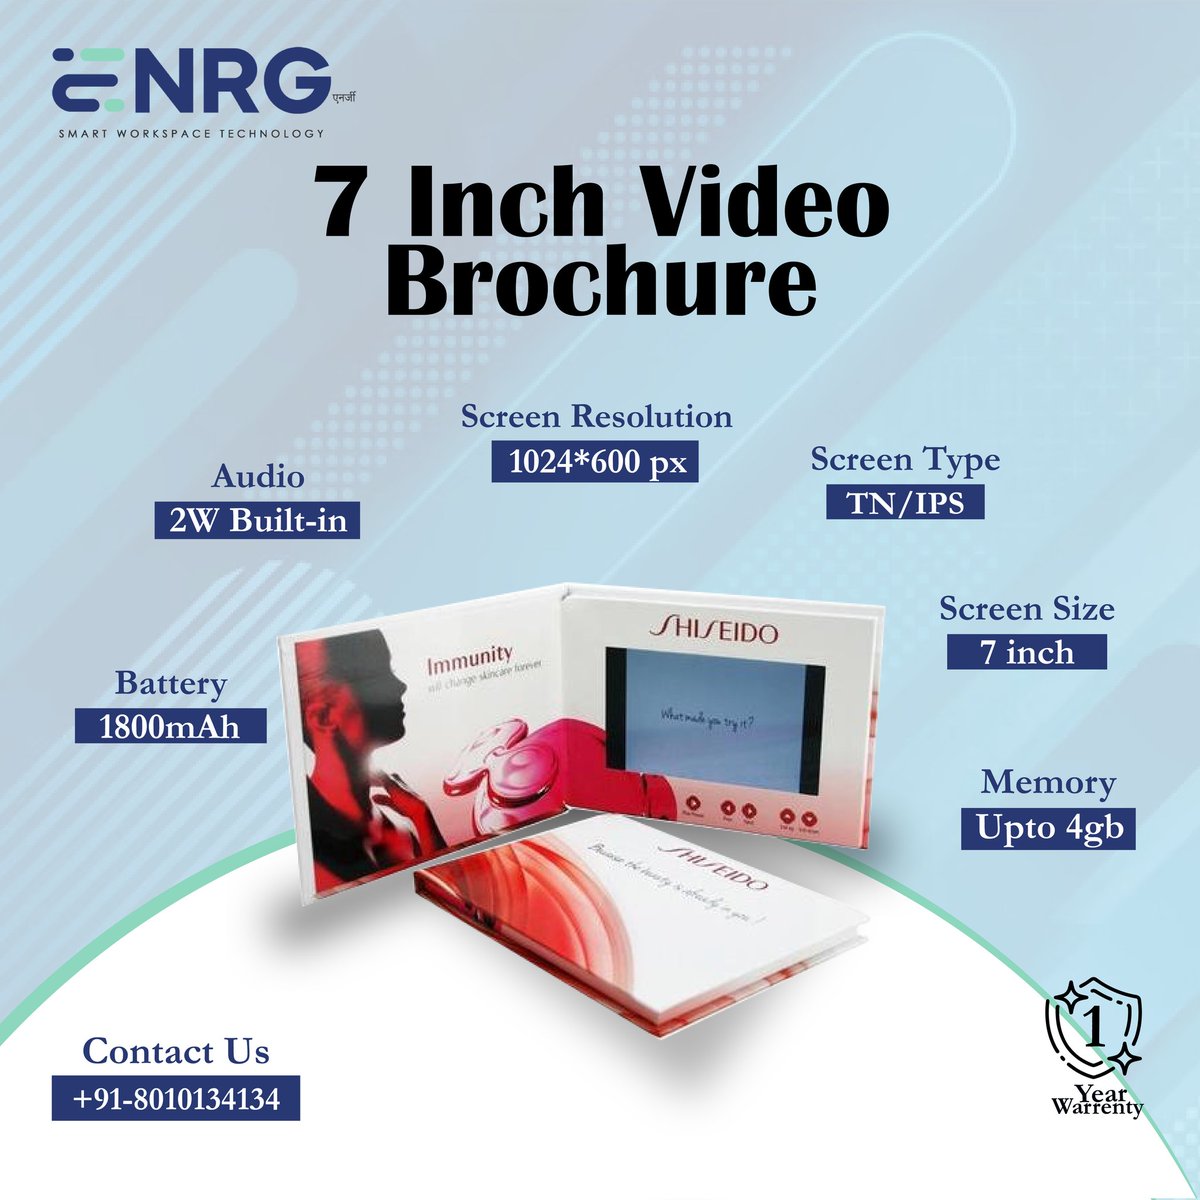 Unveil the Future of Marketing: Video Brochures Blend Innovation with Tradition, Conveying Your Story in Motion. Make Your Message Unforgettable.

#videobrochure #videobrochures #brochures #brochuredesign #technology #marketing #advertising #touchscreen #display #displayscreen